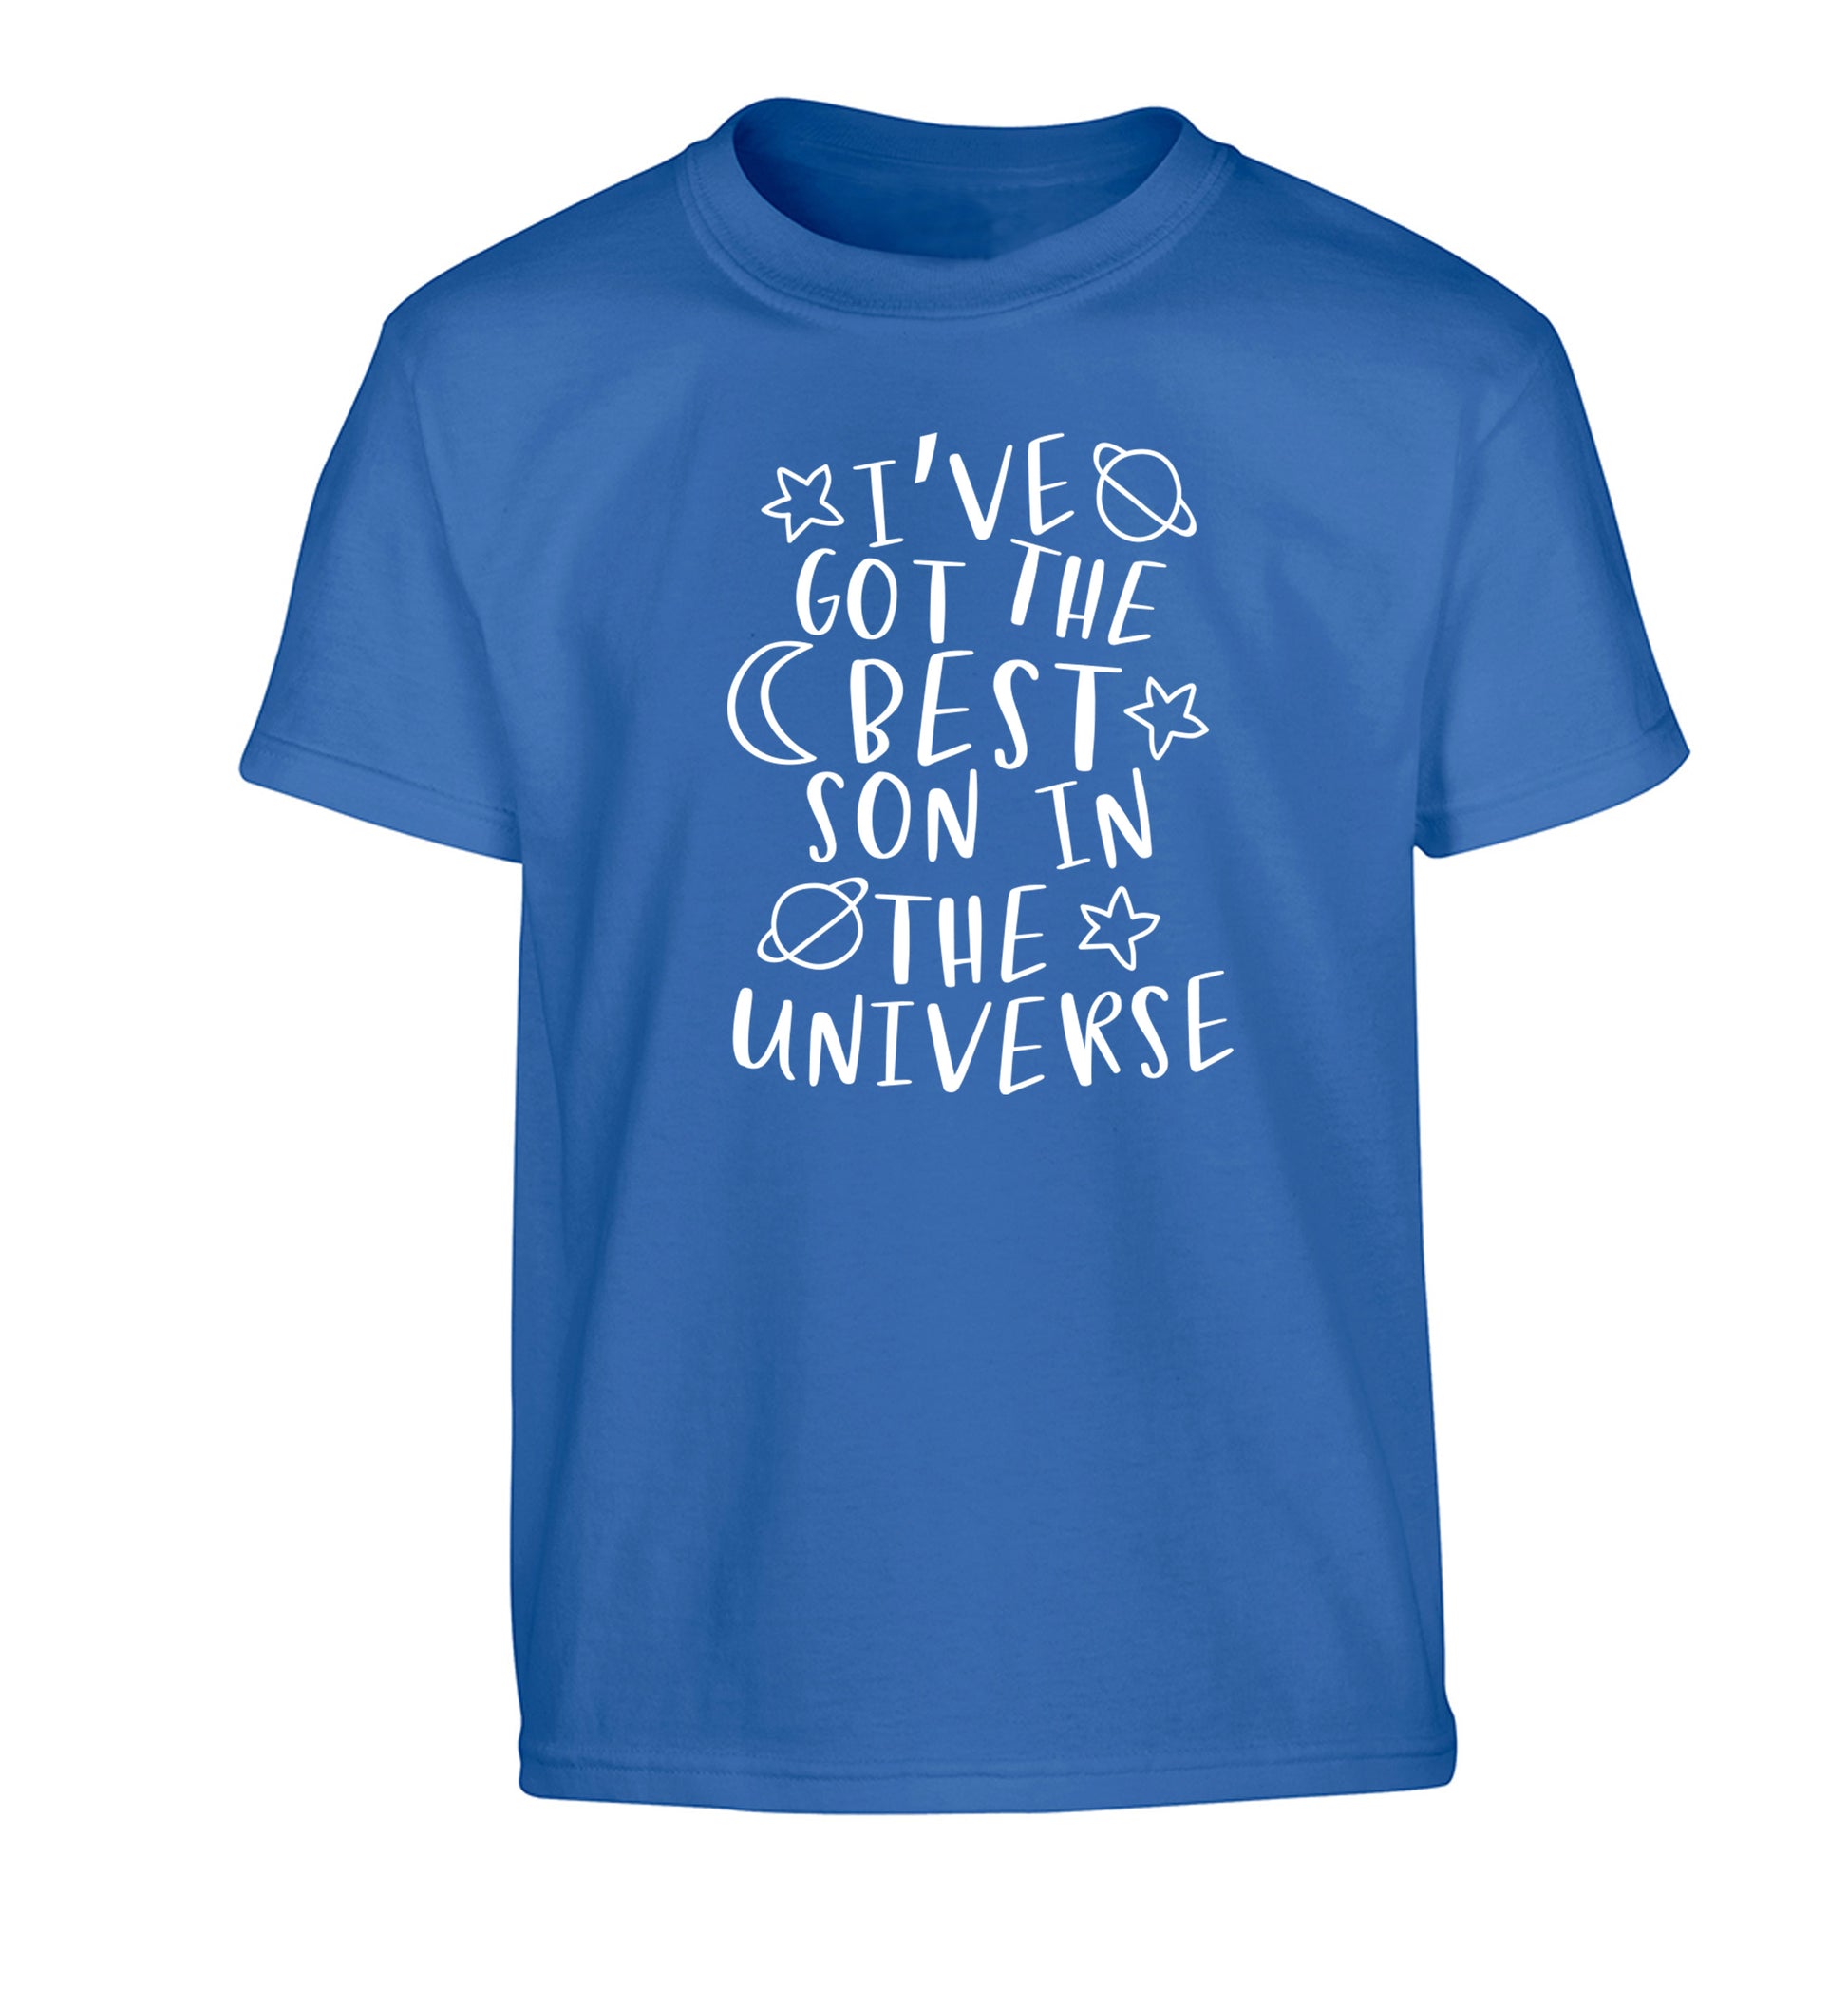 I've got the best son in the universe Children's blue Tshirt 12-13 Years